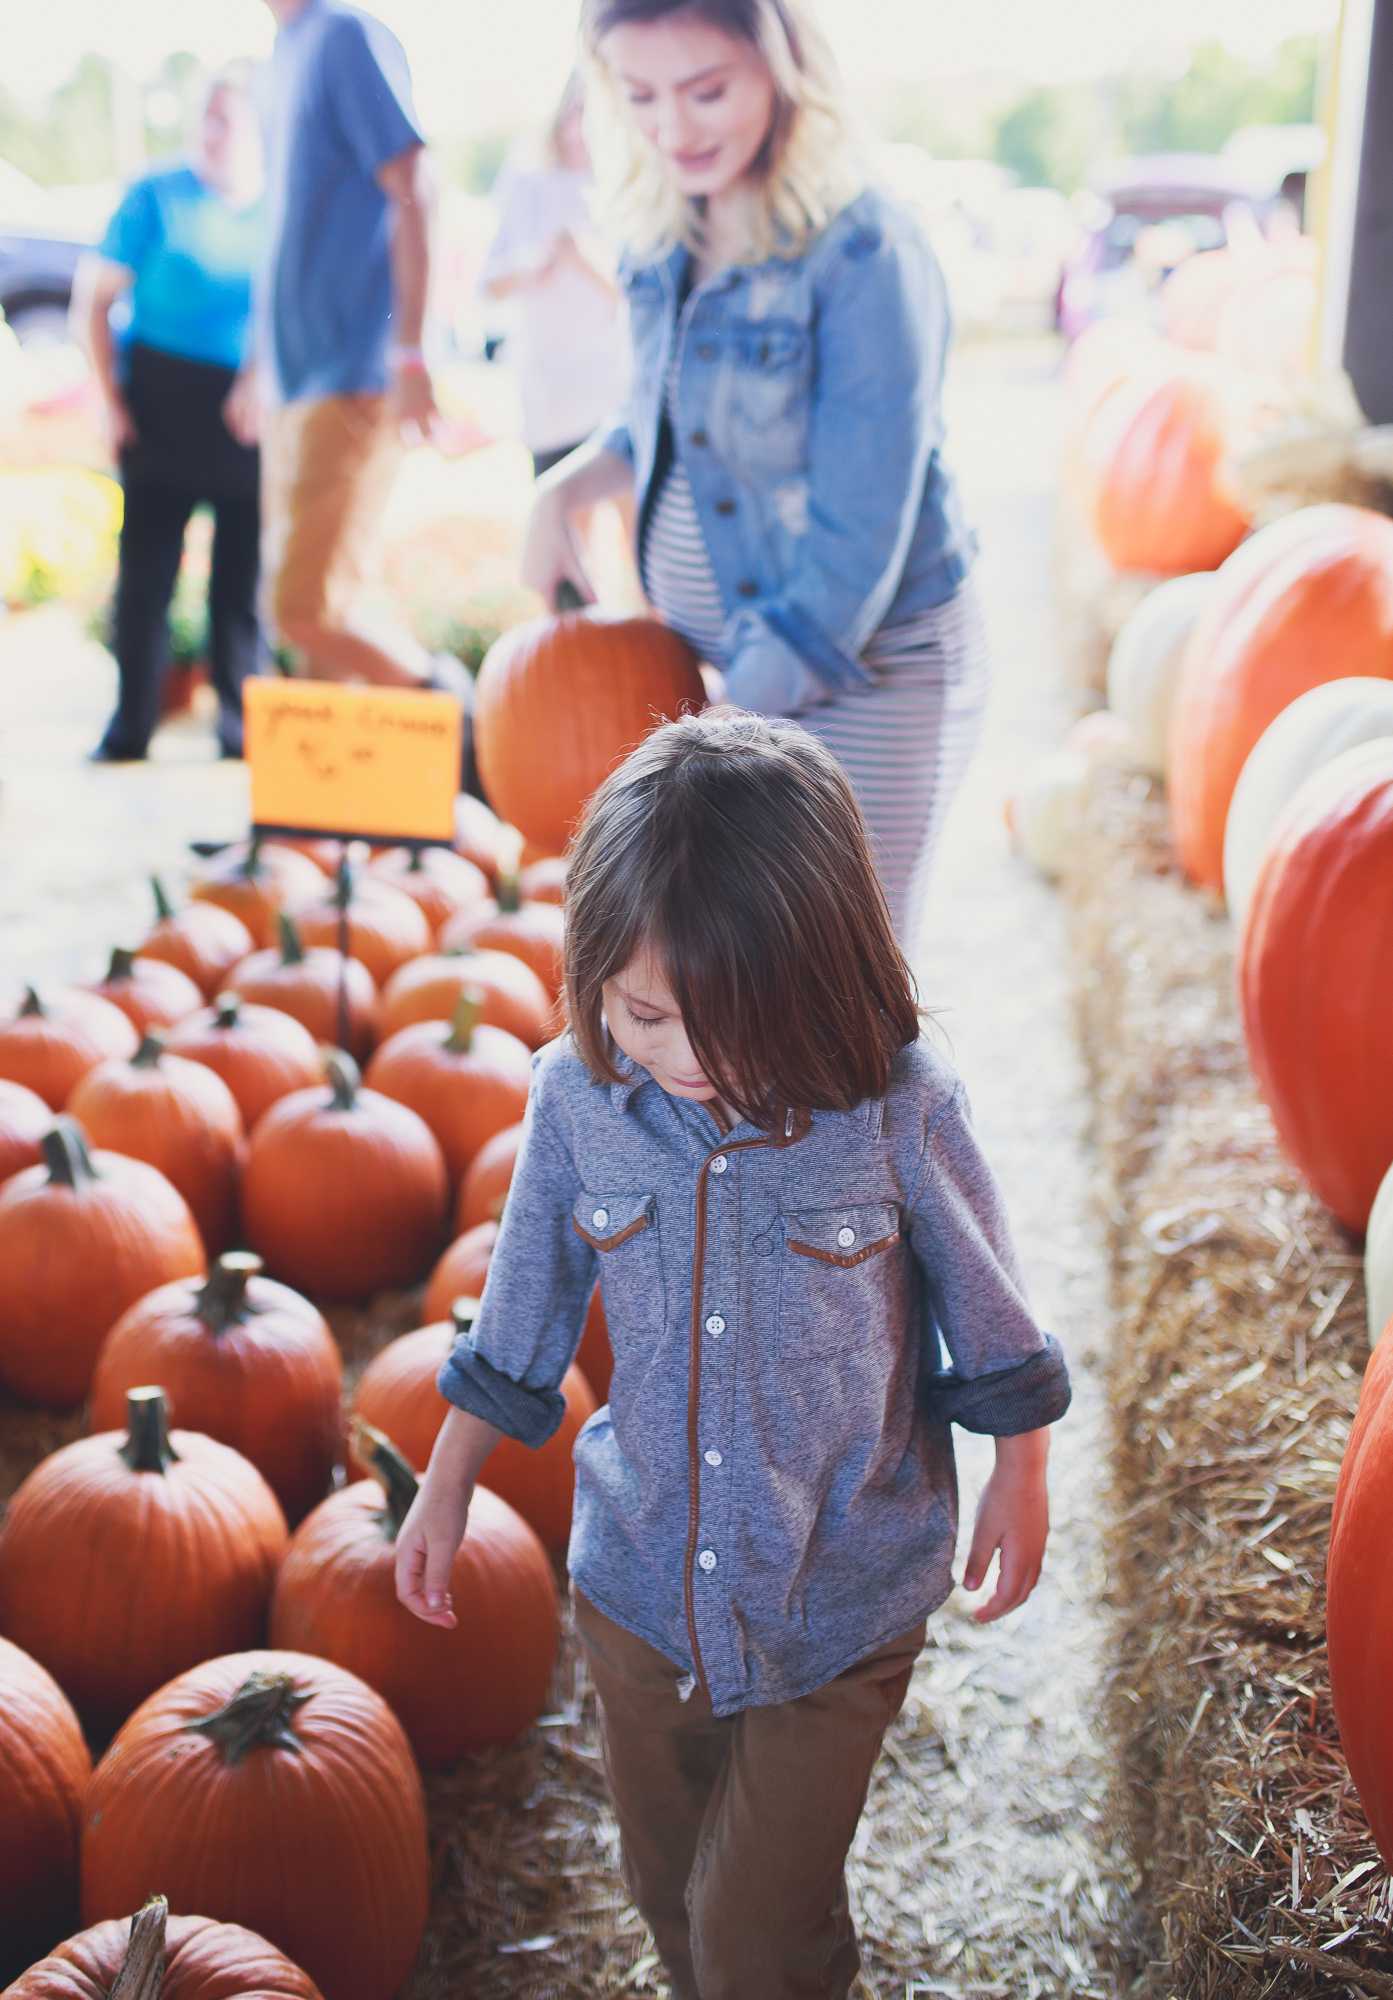 Lifestyle and fashion blogger Jessica Linn from Linn Style wearing a navy blue and white horizontal striped maternity dress from Target and a denim jacket. Shopping for pumpkins at the NC State Farmers Market for fall. October